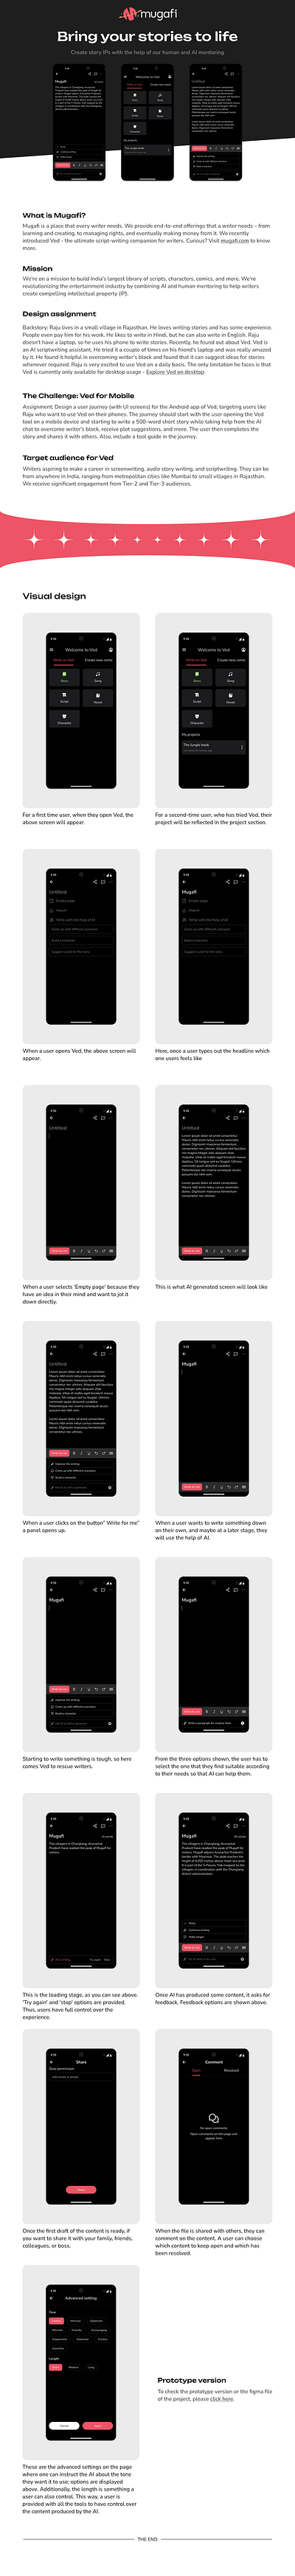 Designed the user flow of the Mobile experience of AI (Ved) branding creative design graphic design illustration legodesign tryingsomethingnew logo typography ui uxdesign